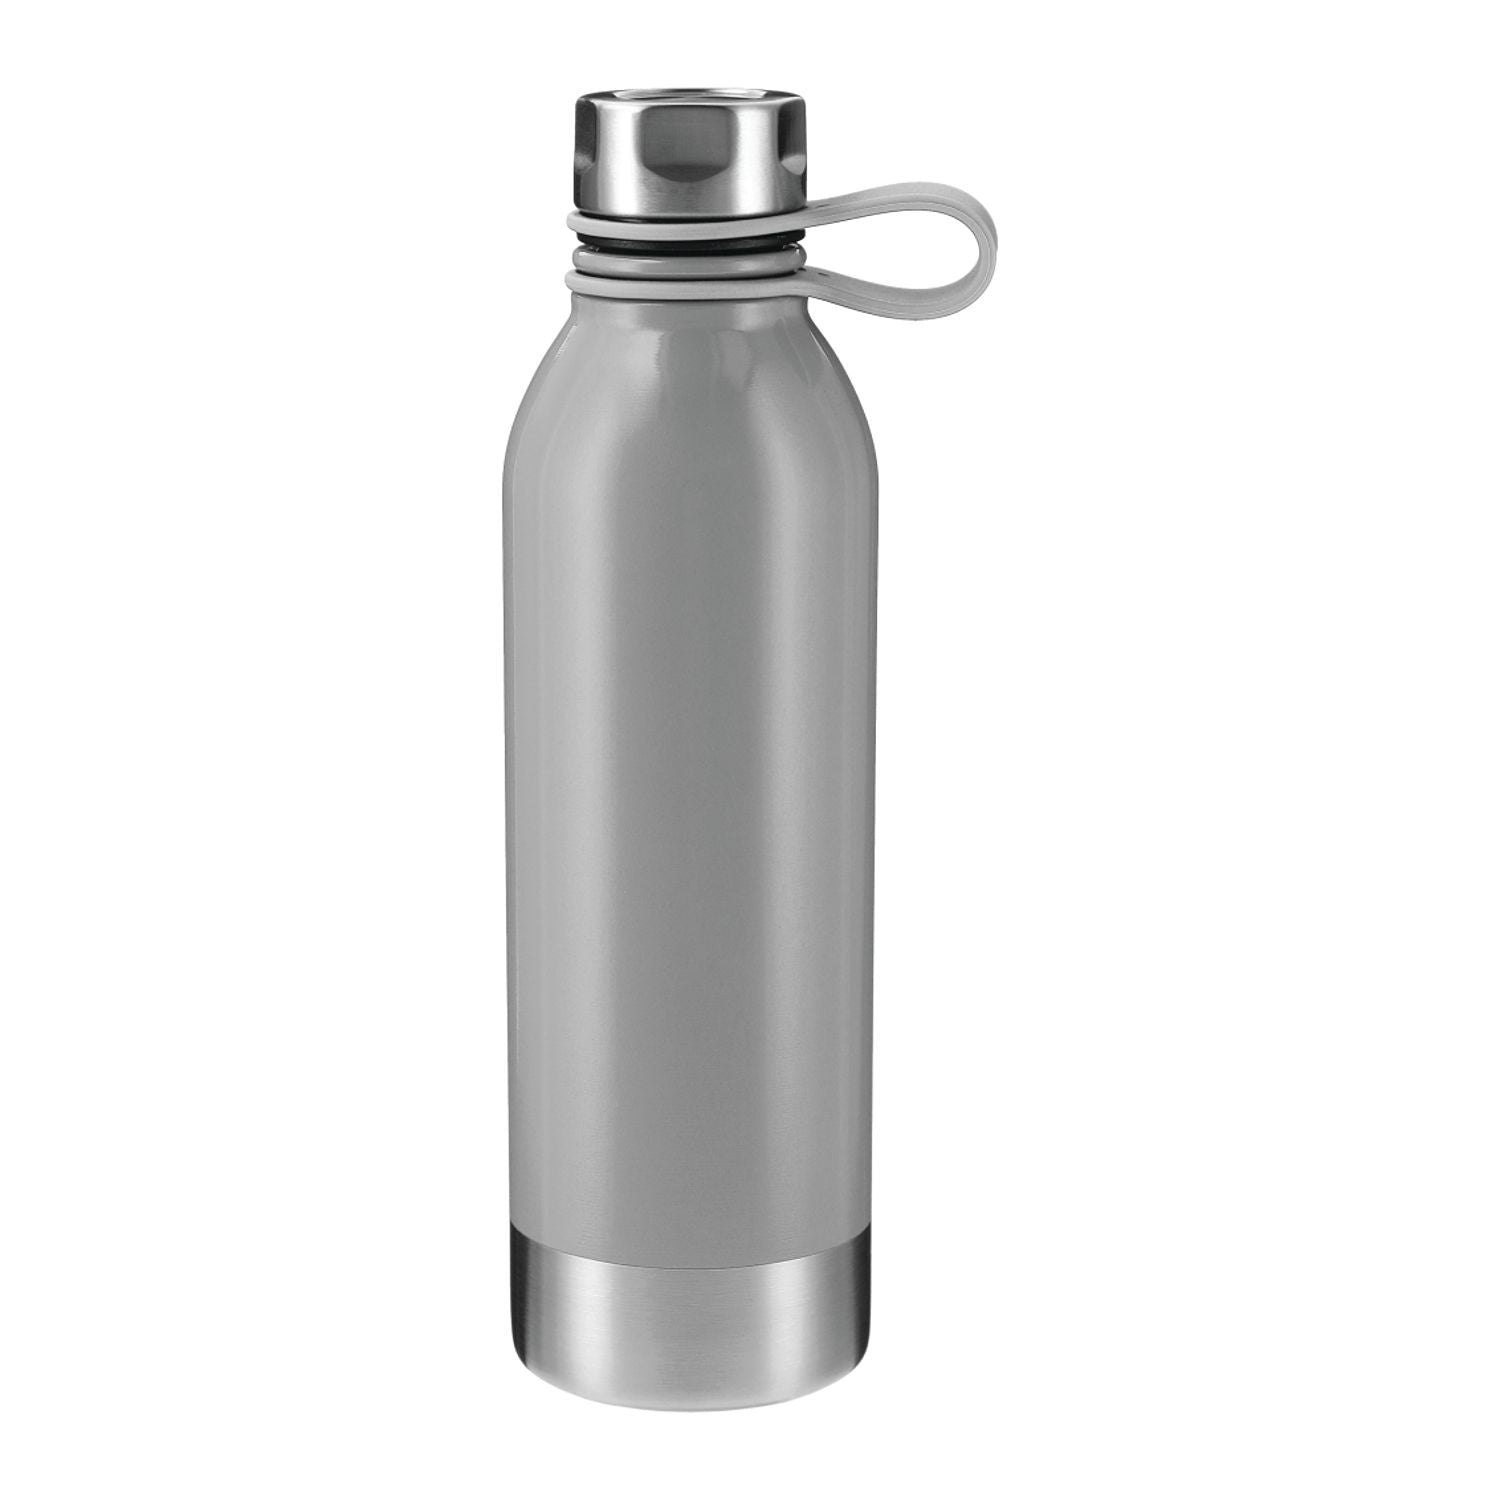 25oz Perth Single-Walled Stainless Steel Sports Water Bottle in gray